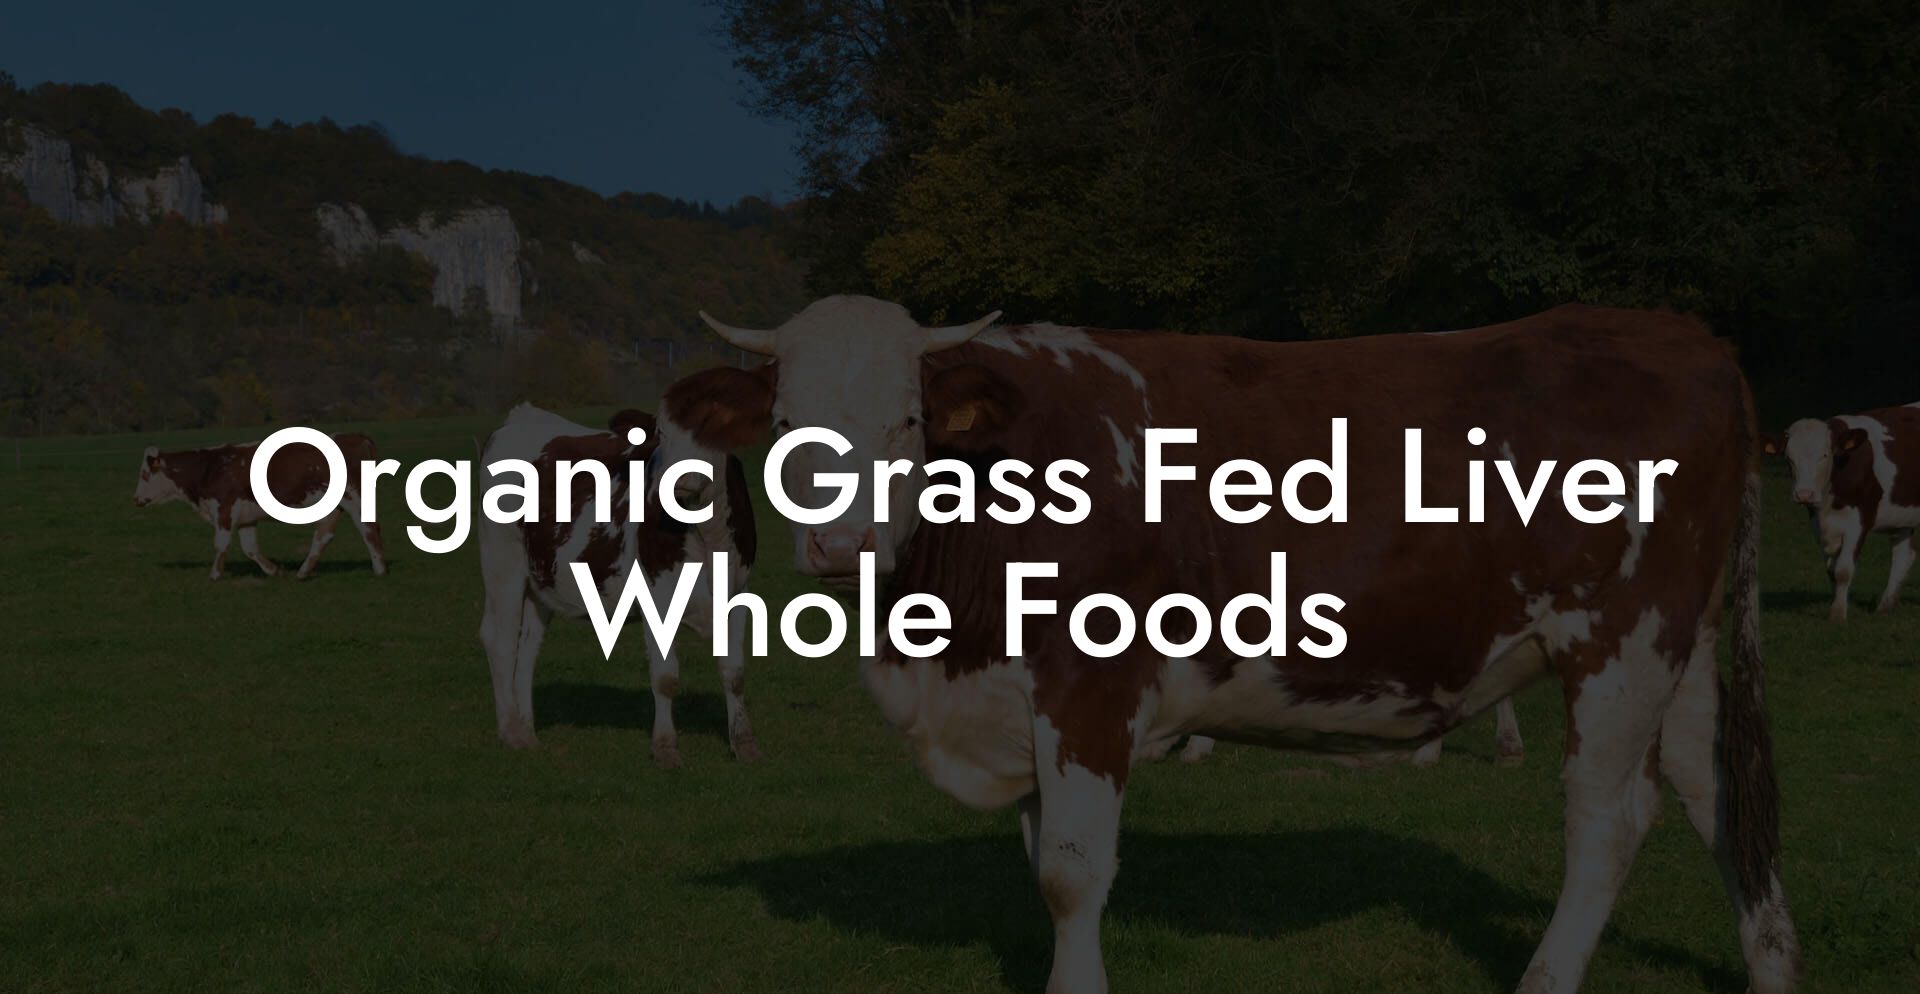 Organic Grass Fed Liver Whole Foods